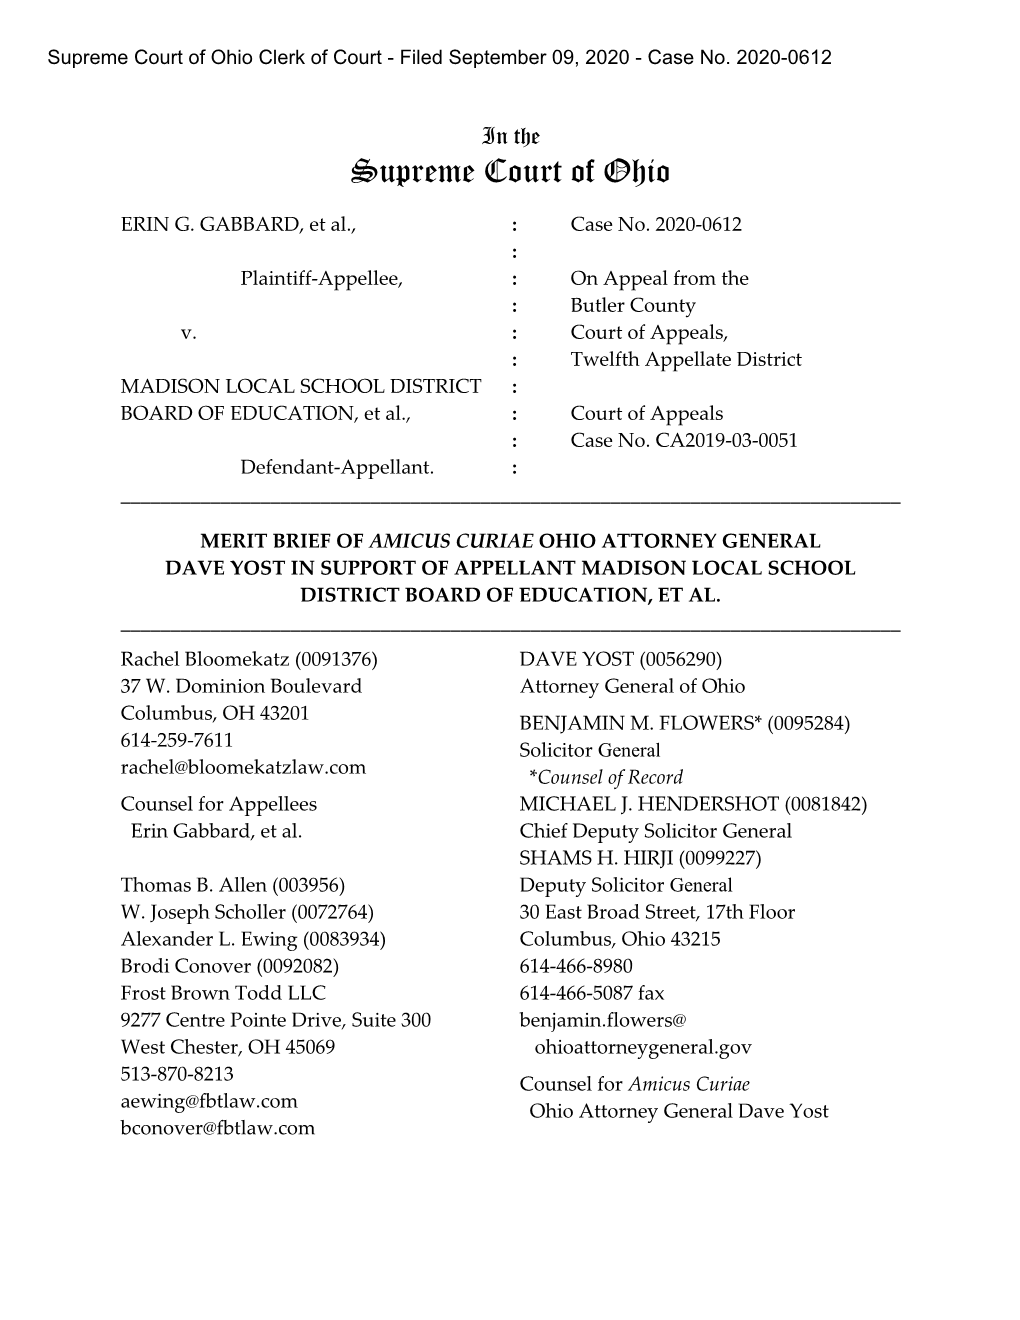 Supreme Court of Ohio Clerk of Court - Filed September 09, 2020 - Case No